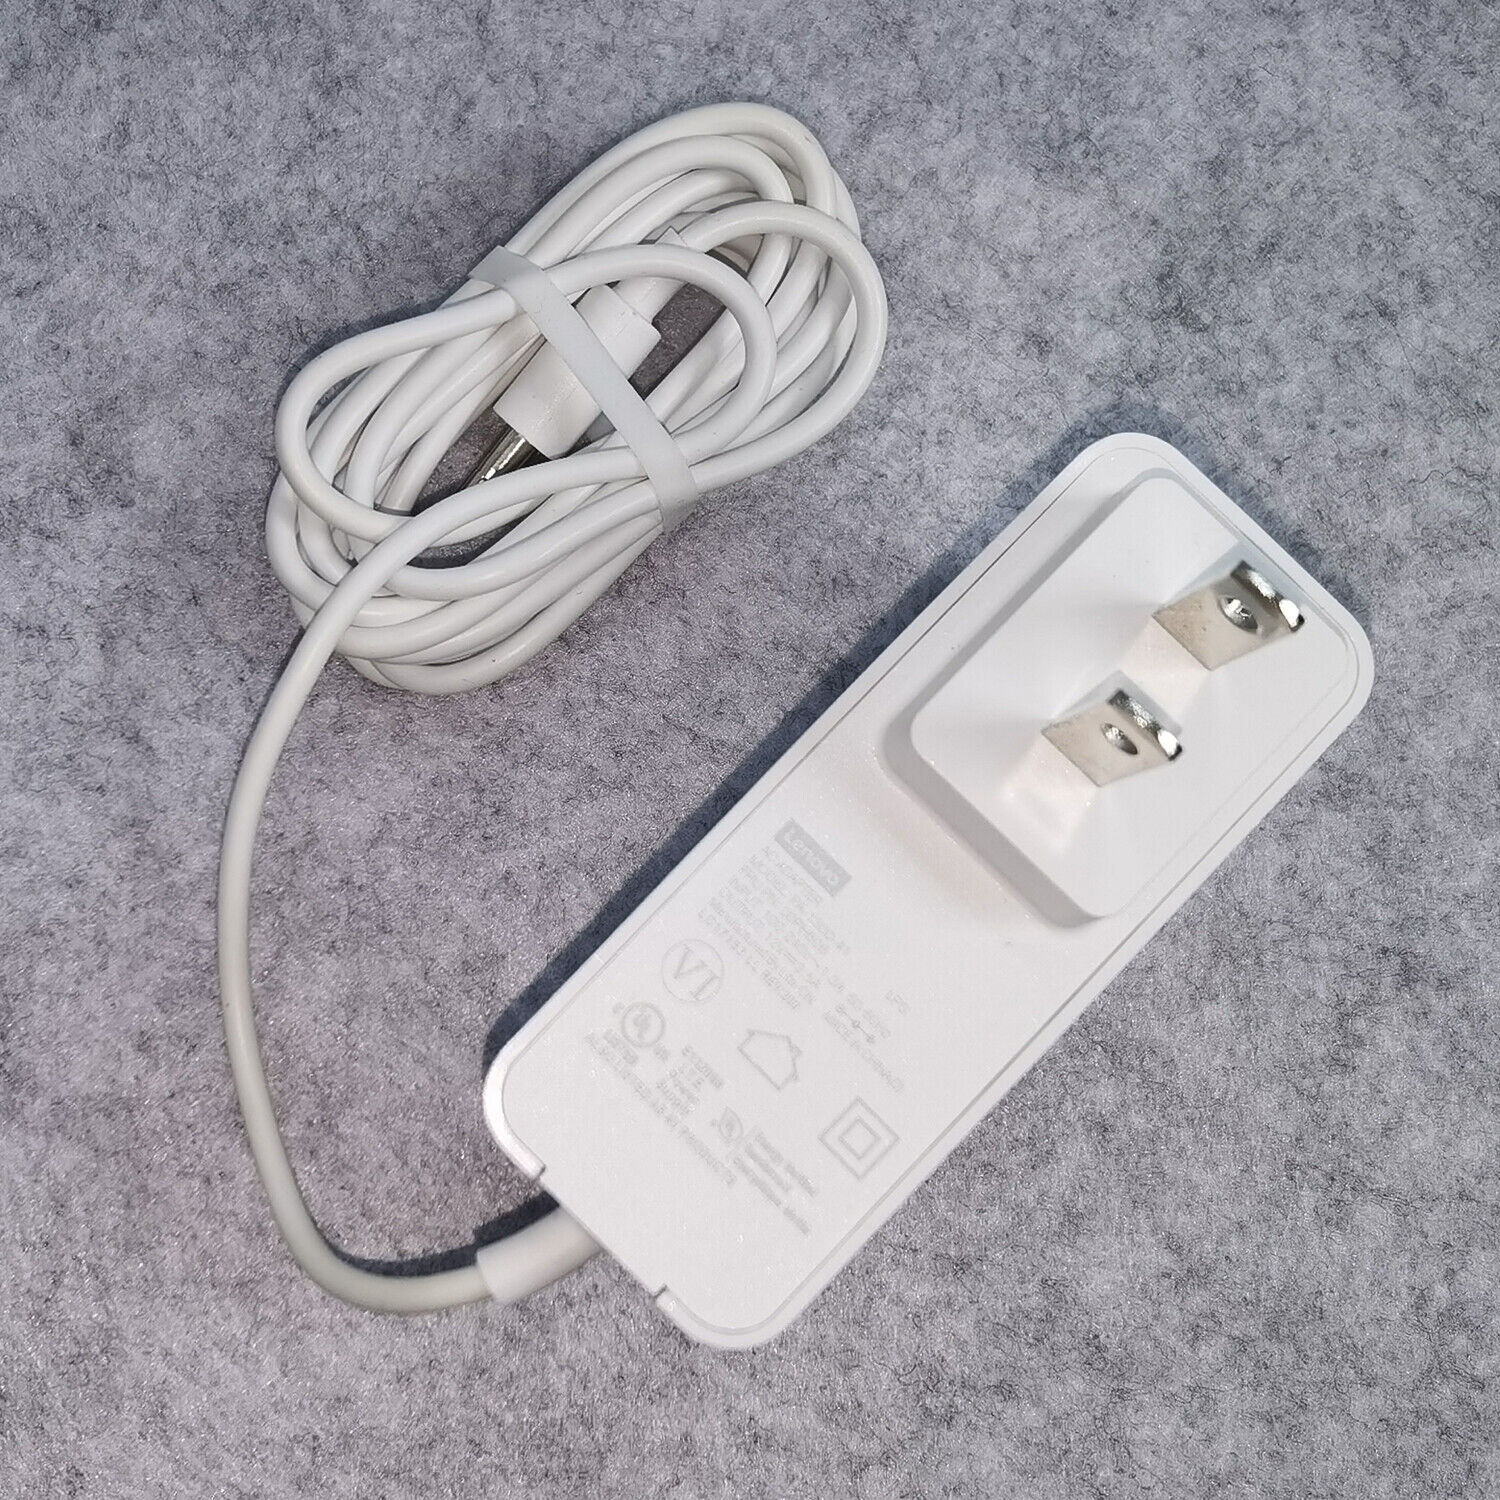 Genuine Segway Ninebot Charger for C8/C9/C10/C15/C20 e-Scooter NBW25D201D0D NEW! Brand Segway Ninebot Type Charger Colo